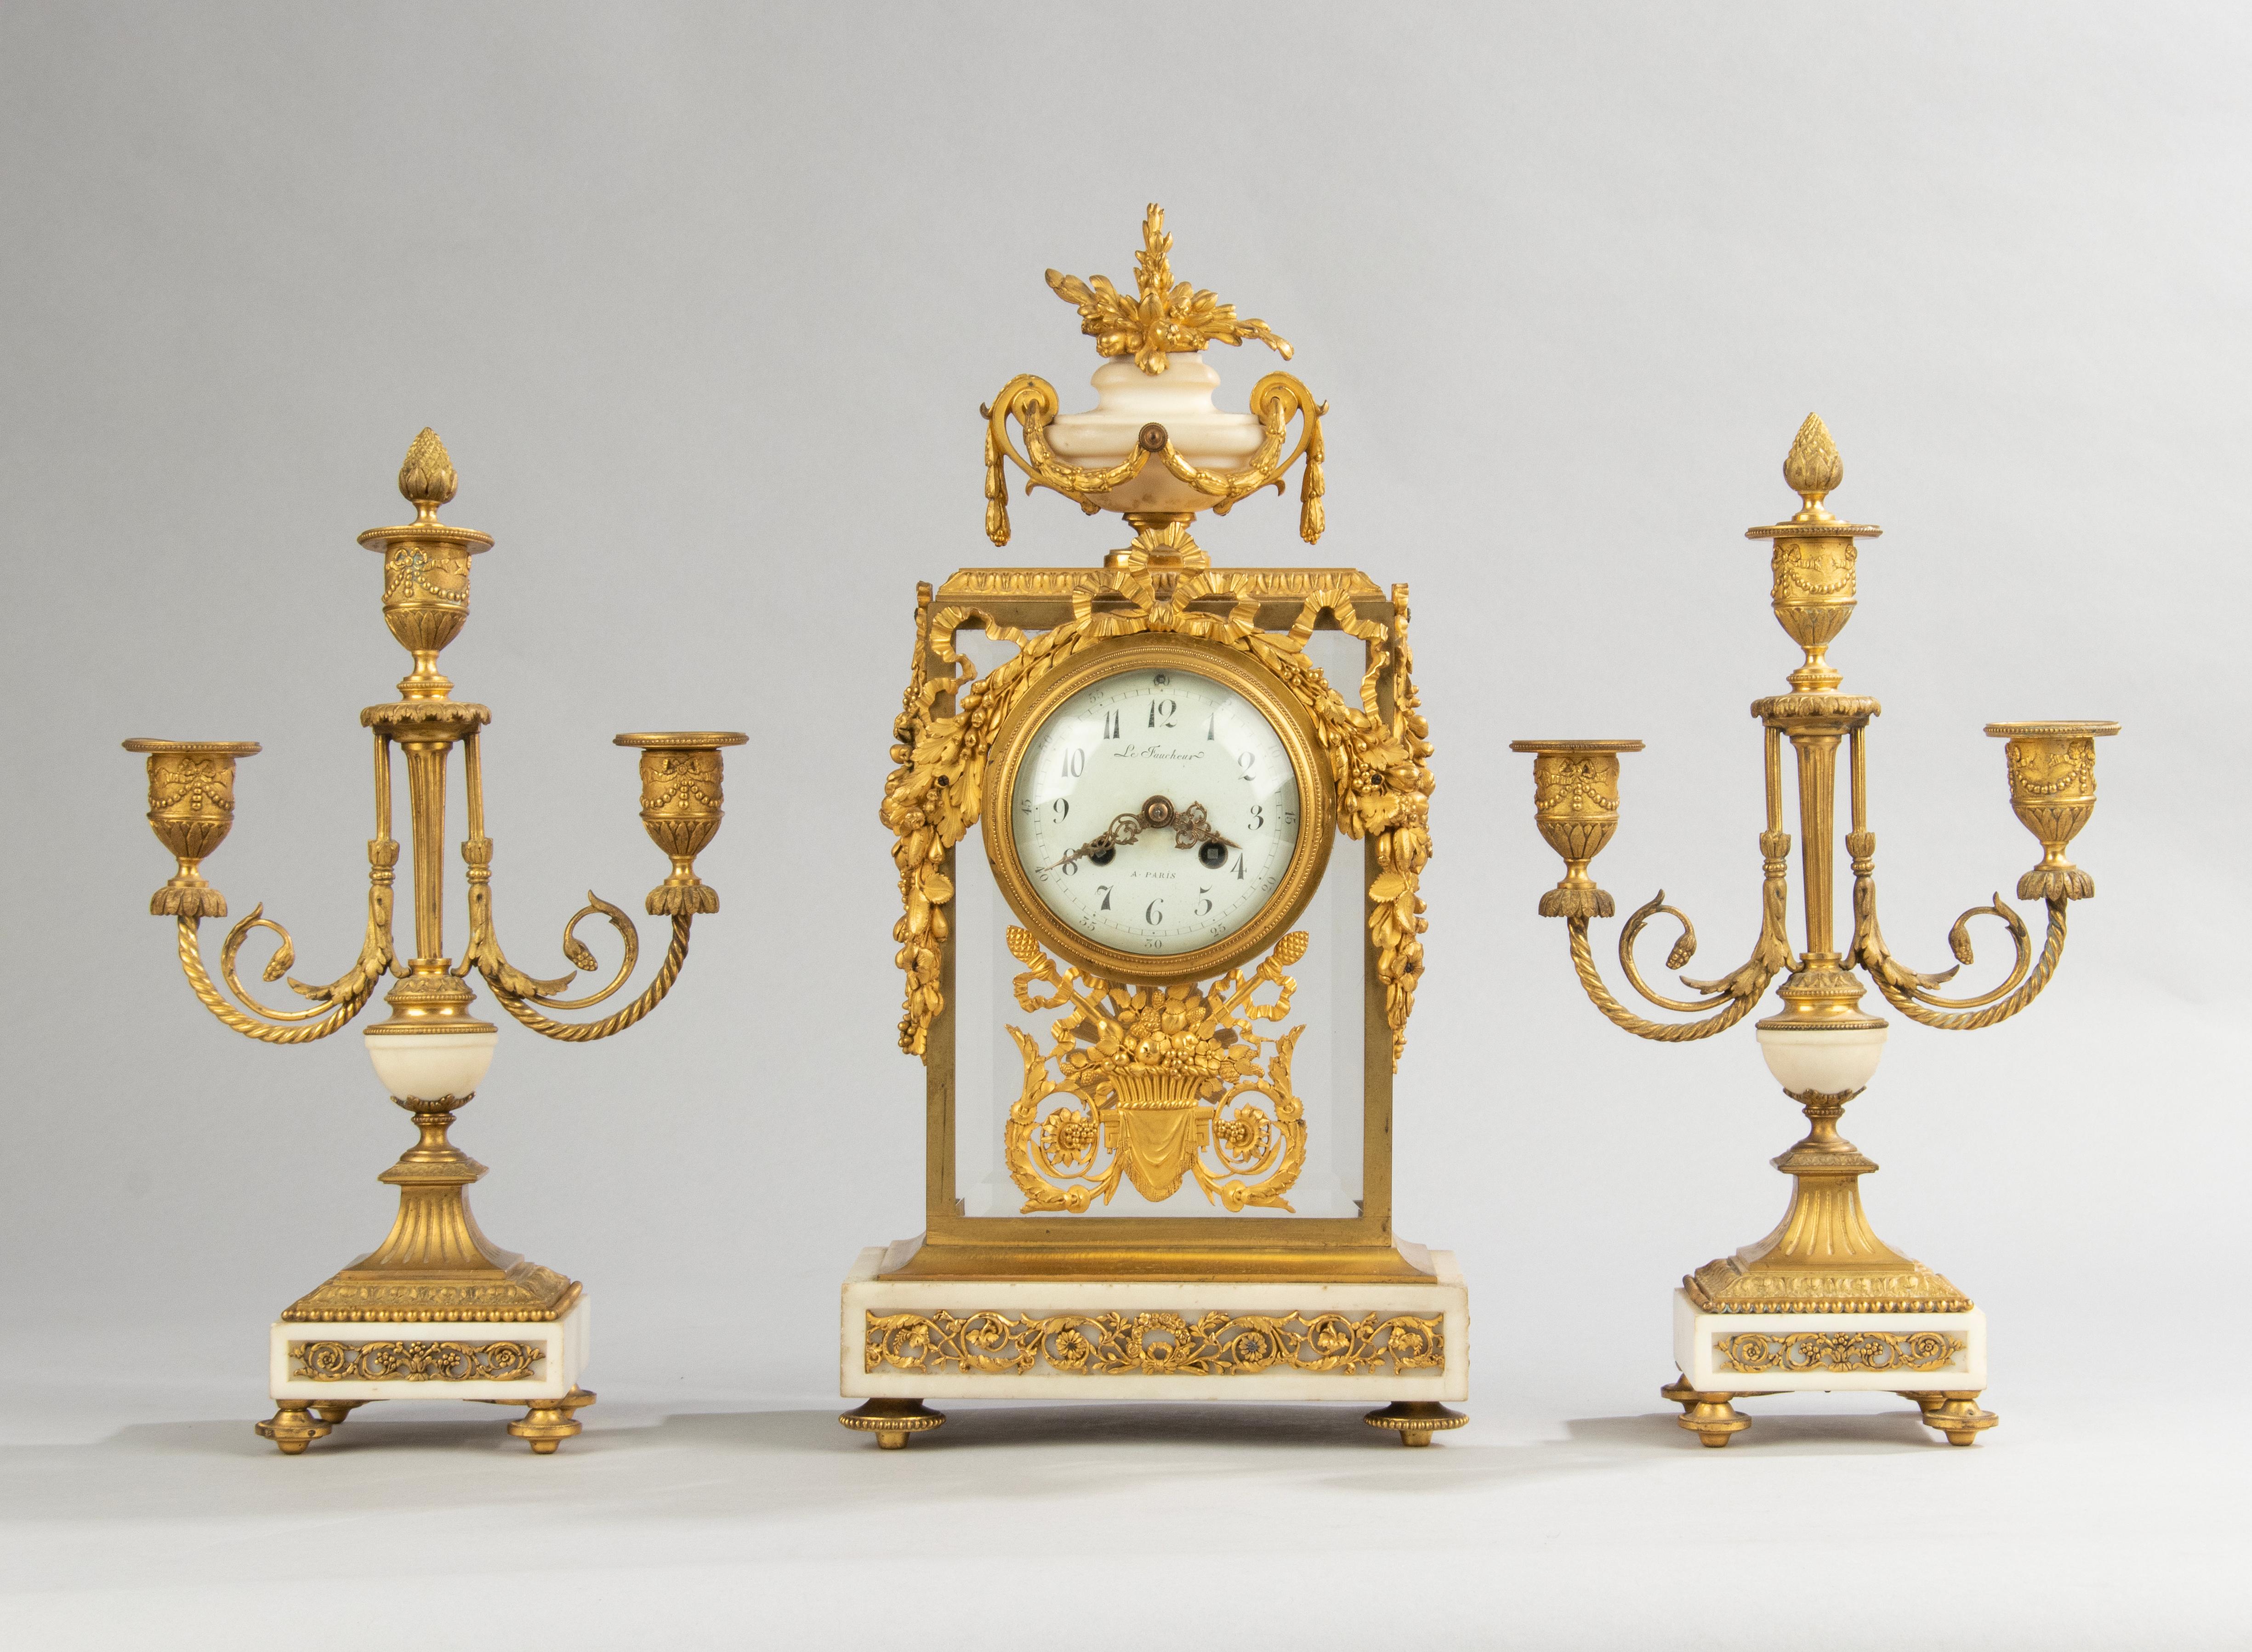 French Late 18th Century Louis XVI Period Bronze Ormolu Mantel Clock with Candelabras For Sale